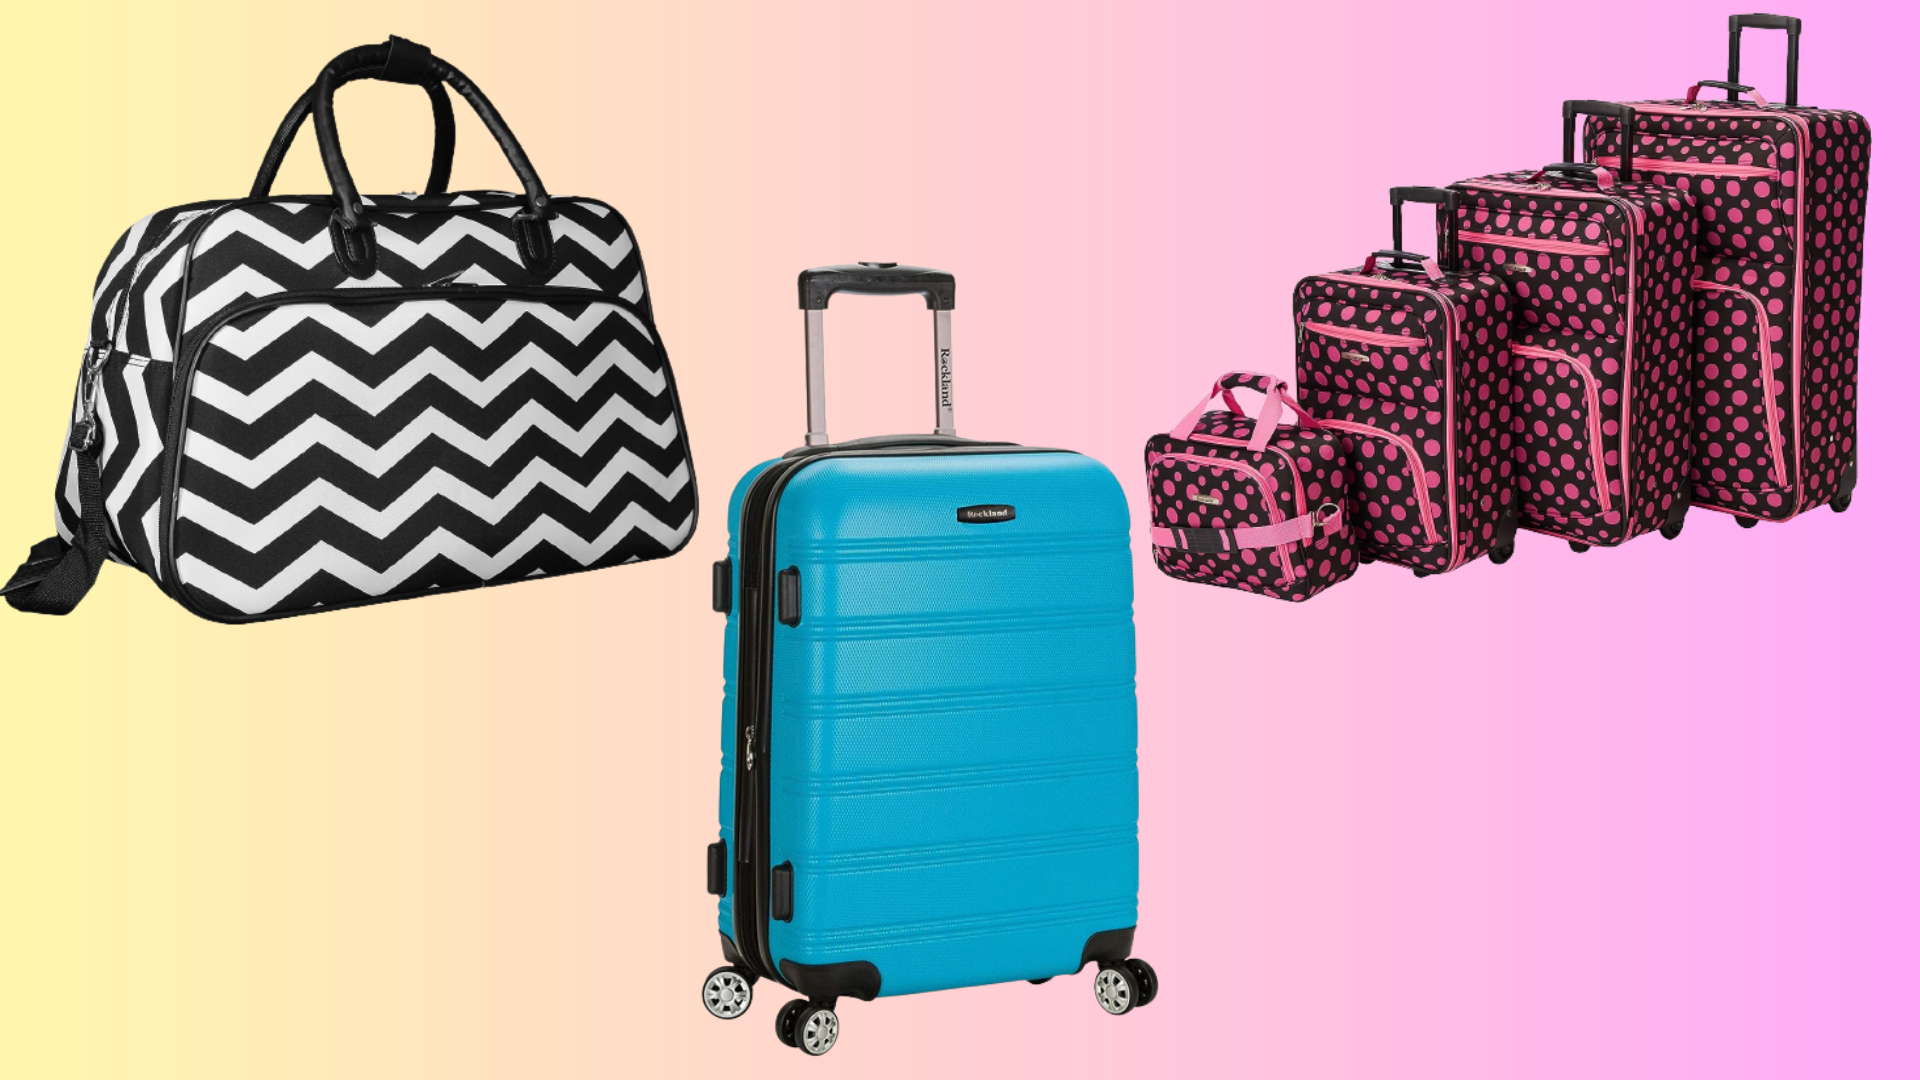 Three pieces of luggage currently on sale at Amazon overlaid on a colorful, gradient background.